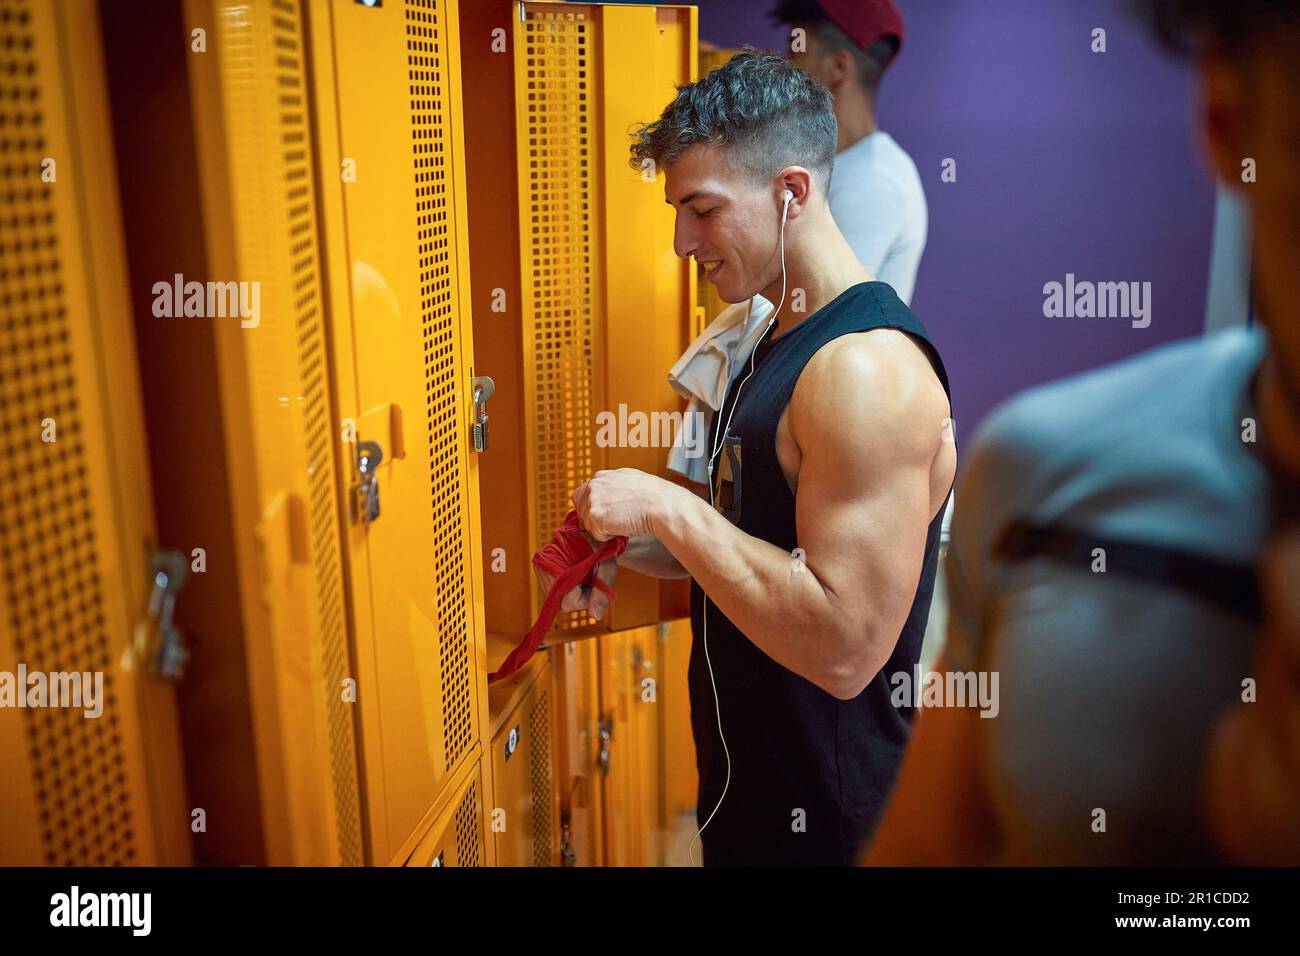 Young man taking red protective tape off his hand in the gym locker room, after workout. Sports, health, lifestyle concept. Stock Photo